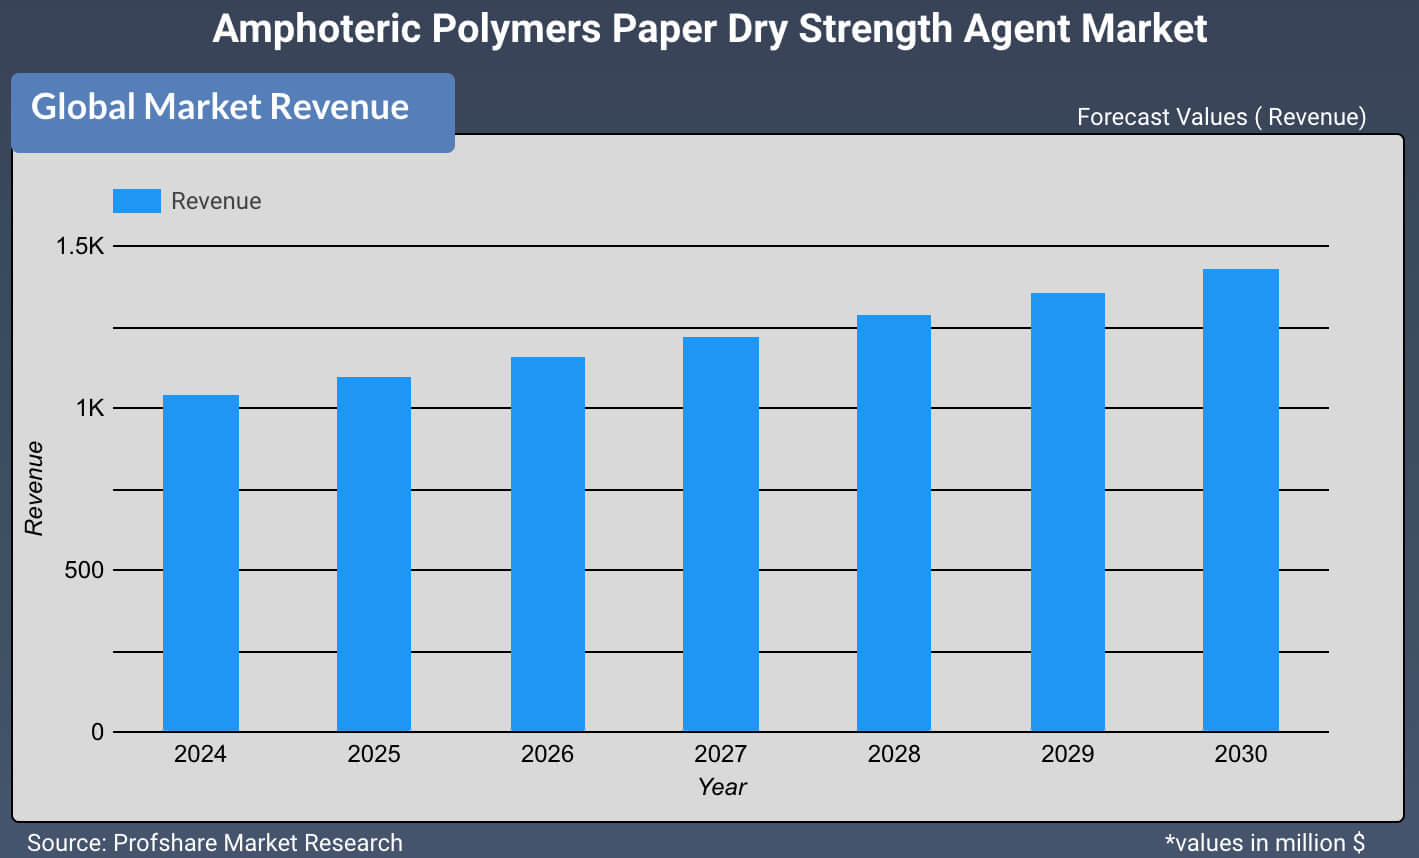 Amphoteric Polymers Paper Dry Strength Agent Market